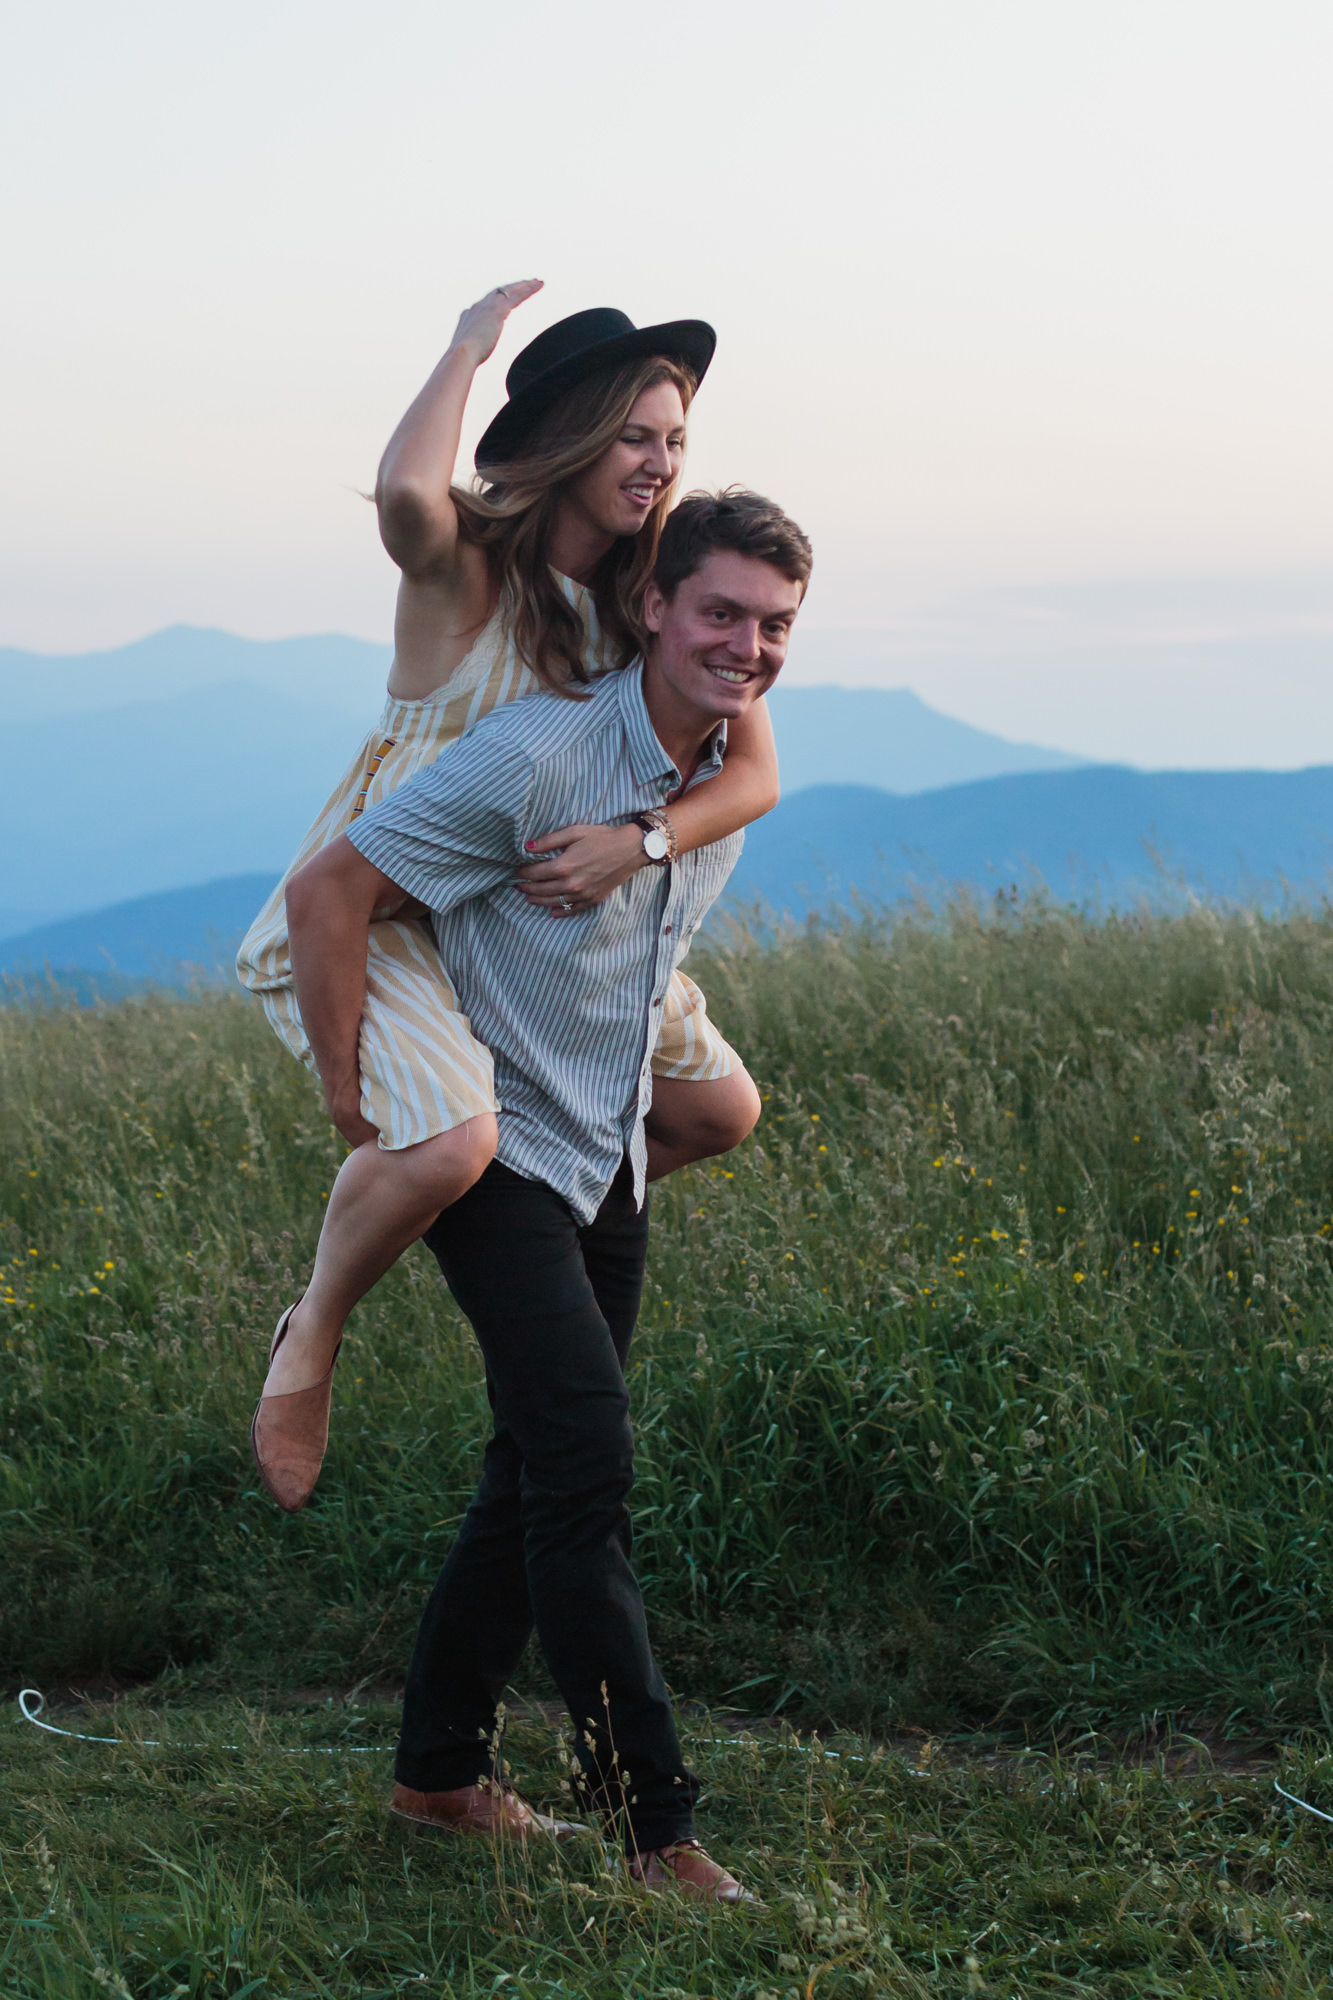 date night guy giving piggyback ride while girl holds onto hat, Nashville engagement, couples mountain, mountain engagement, couples camping, dog photography, Knoxville, couples hiking, camping with dog, North Carolina hiking, summer engagement photos, Tennessee Photography, Tennessee Photographer, Tennessee Photos, Tennessee Engagement Photography, Tennessee Engagement Photos, Tennessee Engagement Photographer, Tennessee Portrait Photographer, Nashville Engagement Photographer, Nashville Engagement Photos, Knoxville Engagement, Nashville Lifestyle Photographer, Nashville Lifestyle Photography, Nashville Lifestyle Photos, Creative Portraits